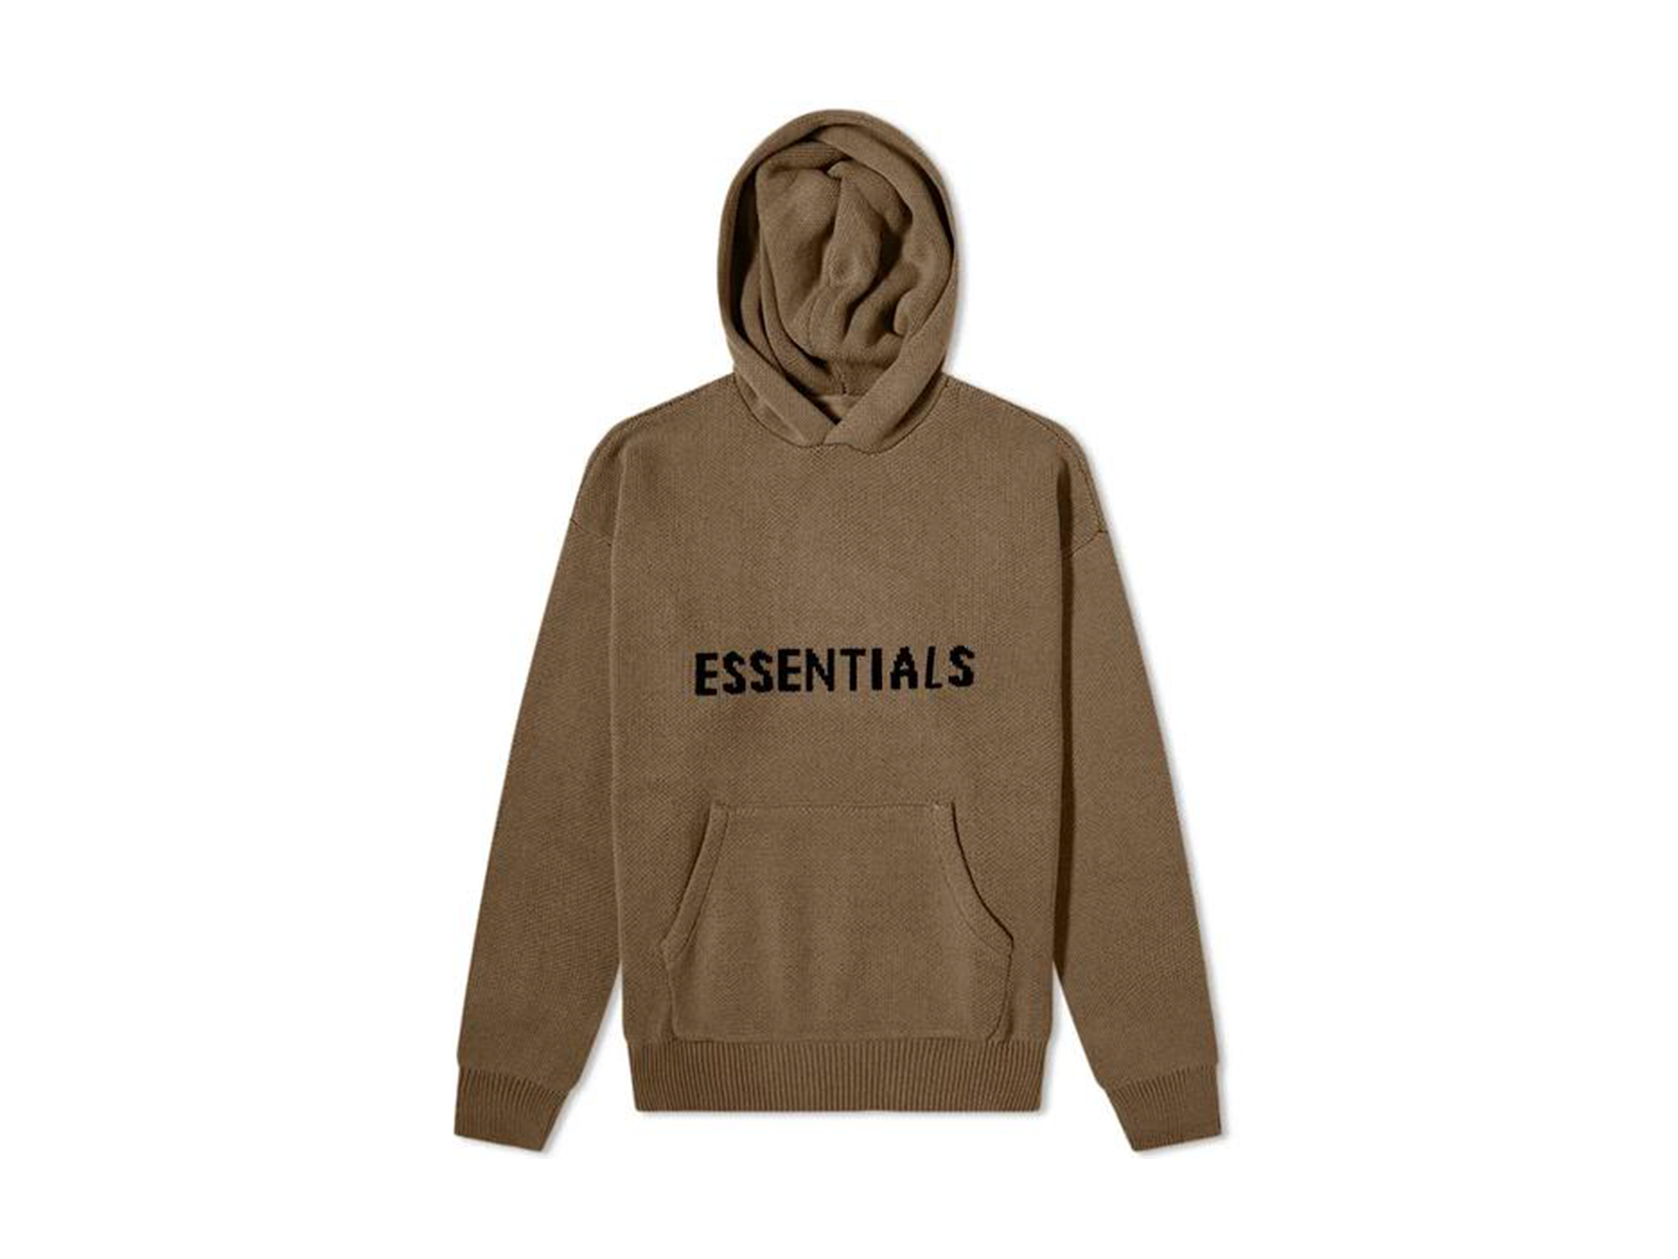 Double Boxed hoodie 249.99 FEAR OF GOD ESSENTIALS SS21 PULLOVER KNIT HOODIE HARVEST Double Boxed